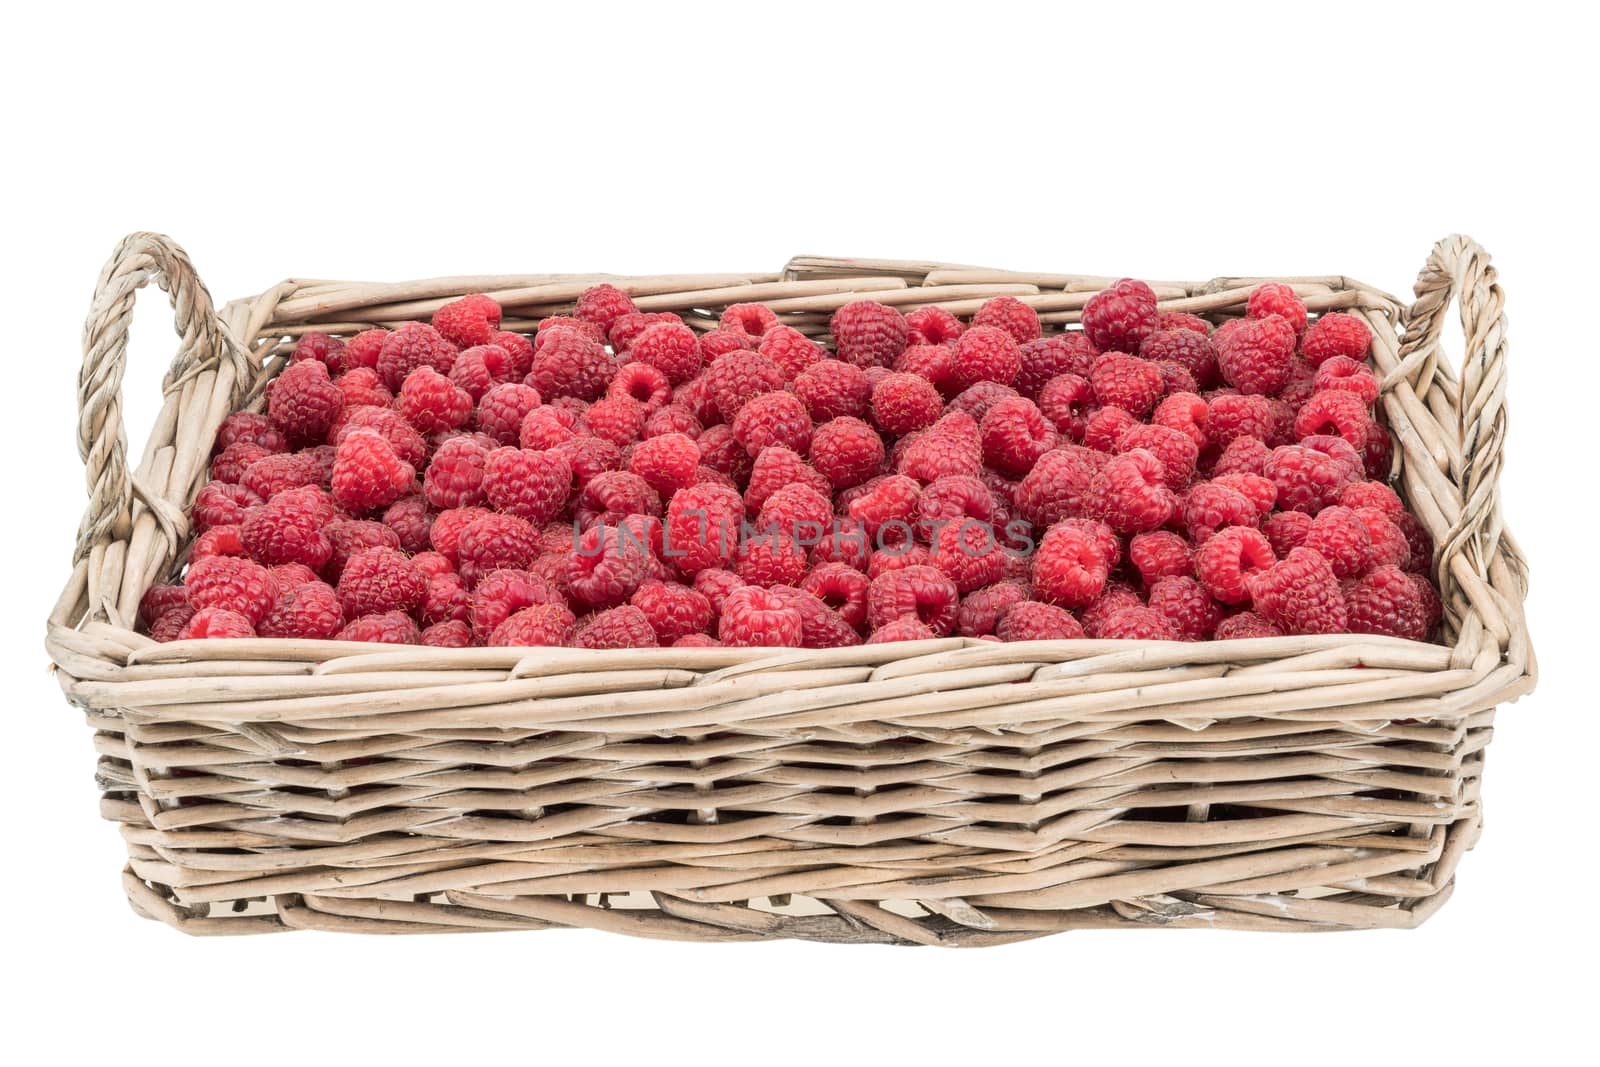 Raspberries in the basket isolated on white background by DGolbay